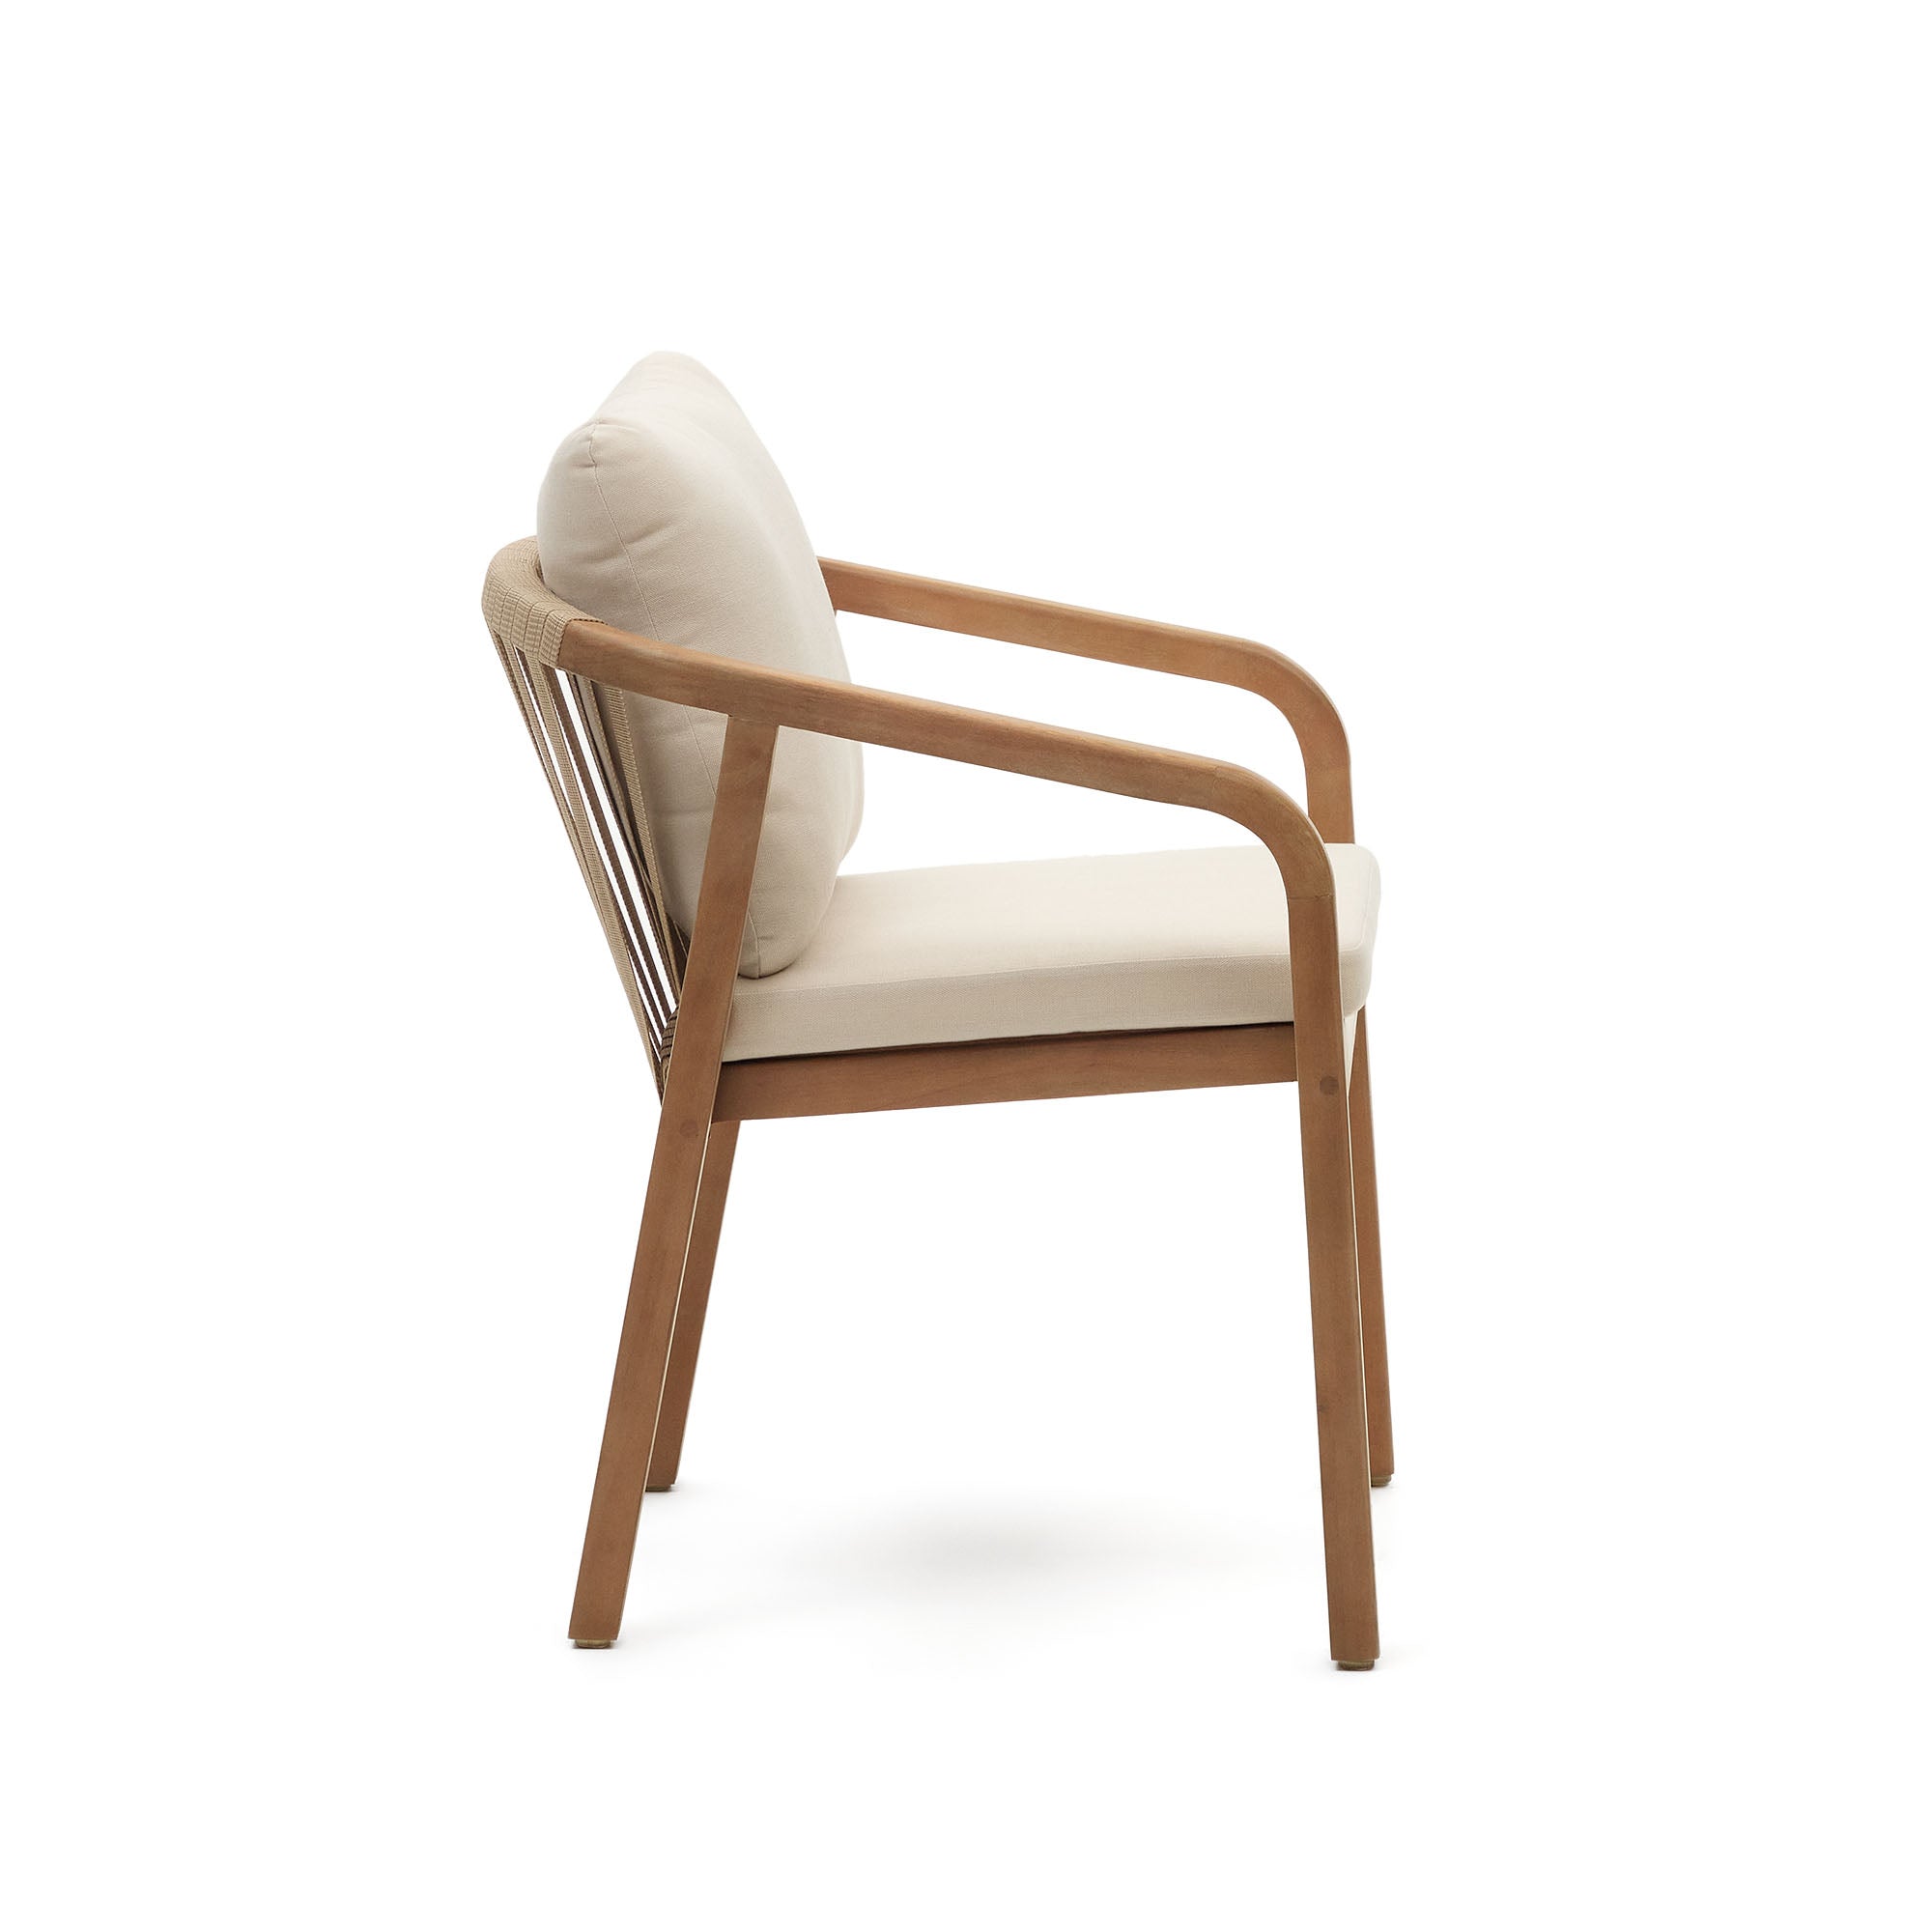 Malaret stackable chair in solid eucalyptus and beige cord, FSC